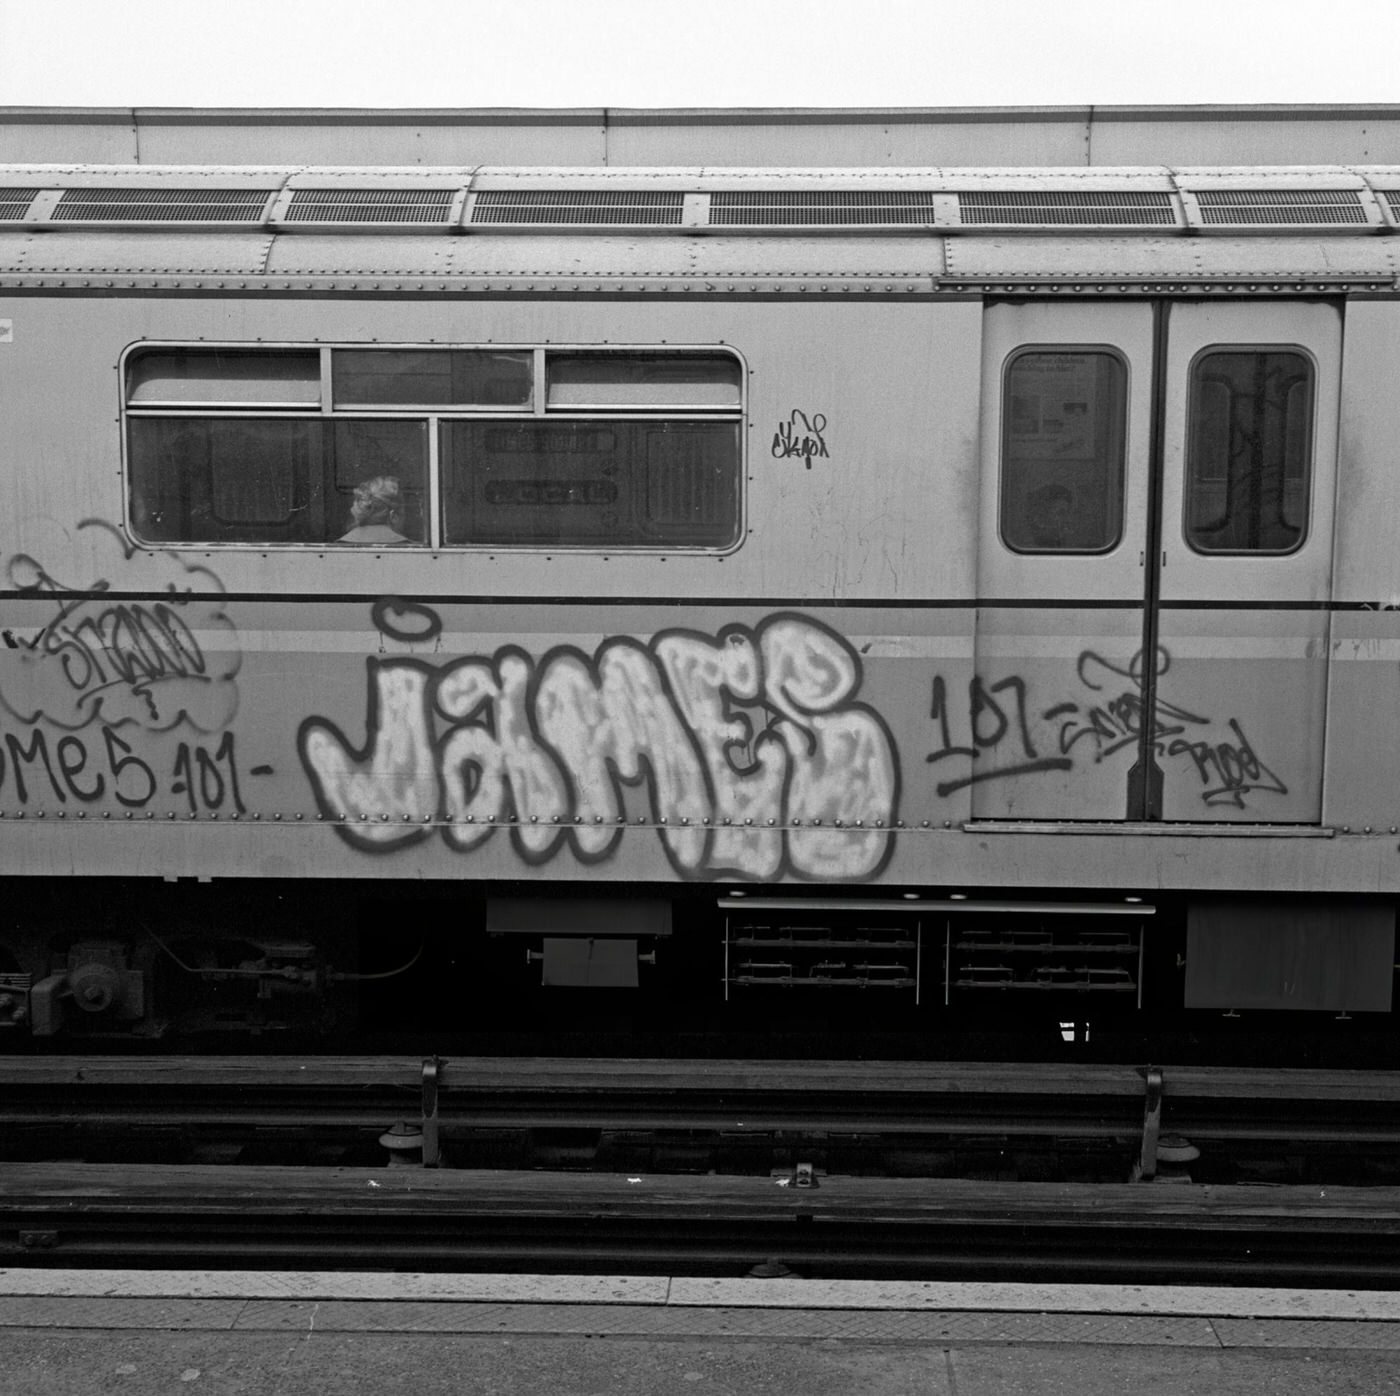 Graffiti On The Side Of A Train At The 103Rd Street-Corona Plaza Subway Station, Queens, 1975.